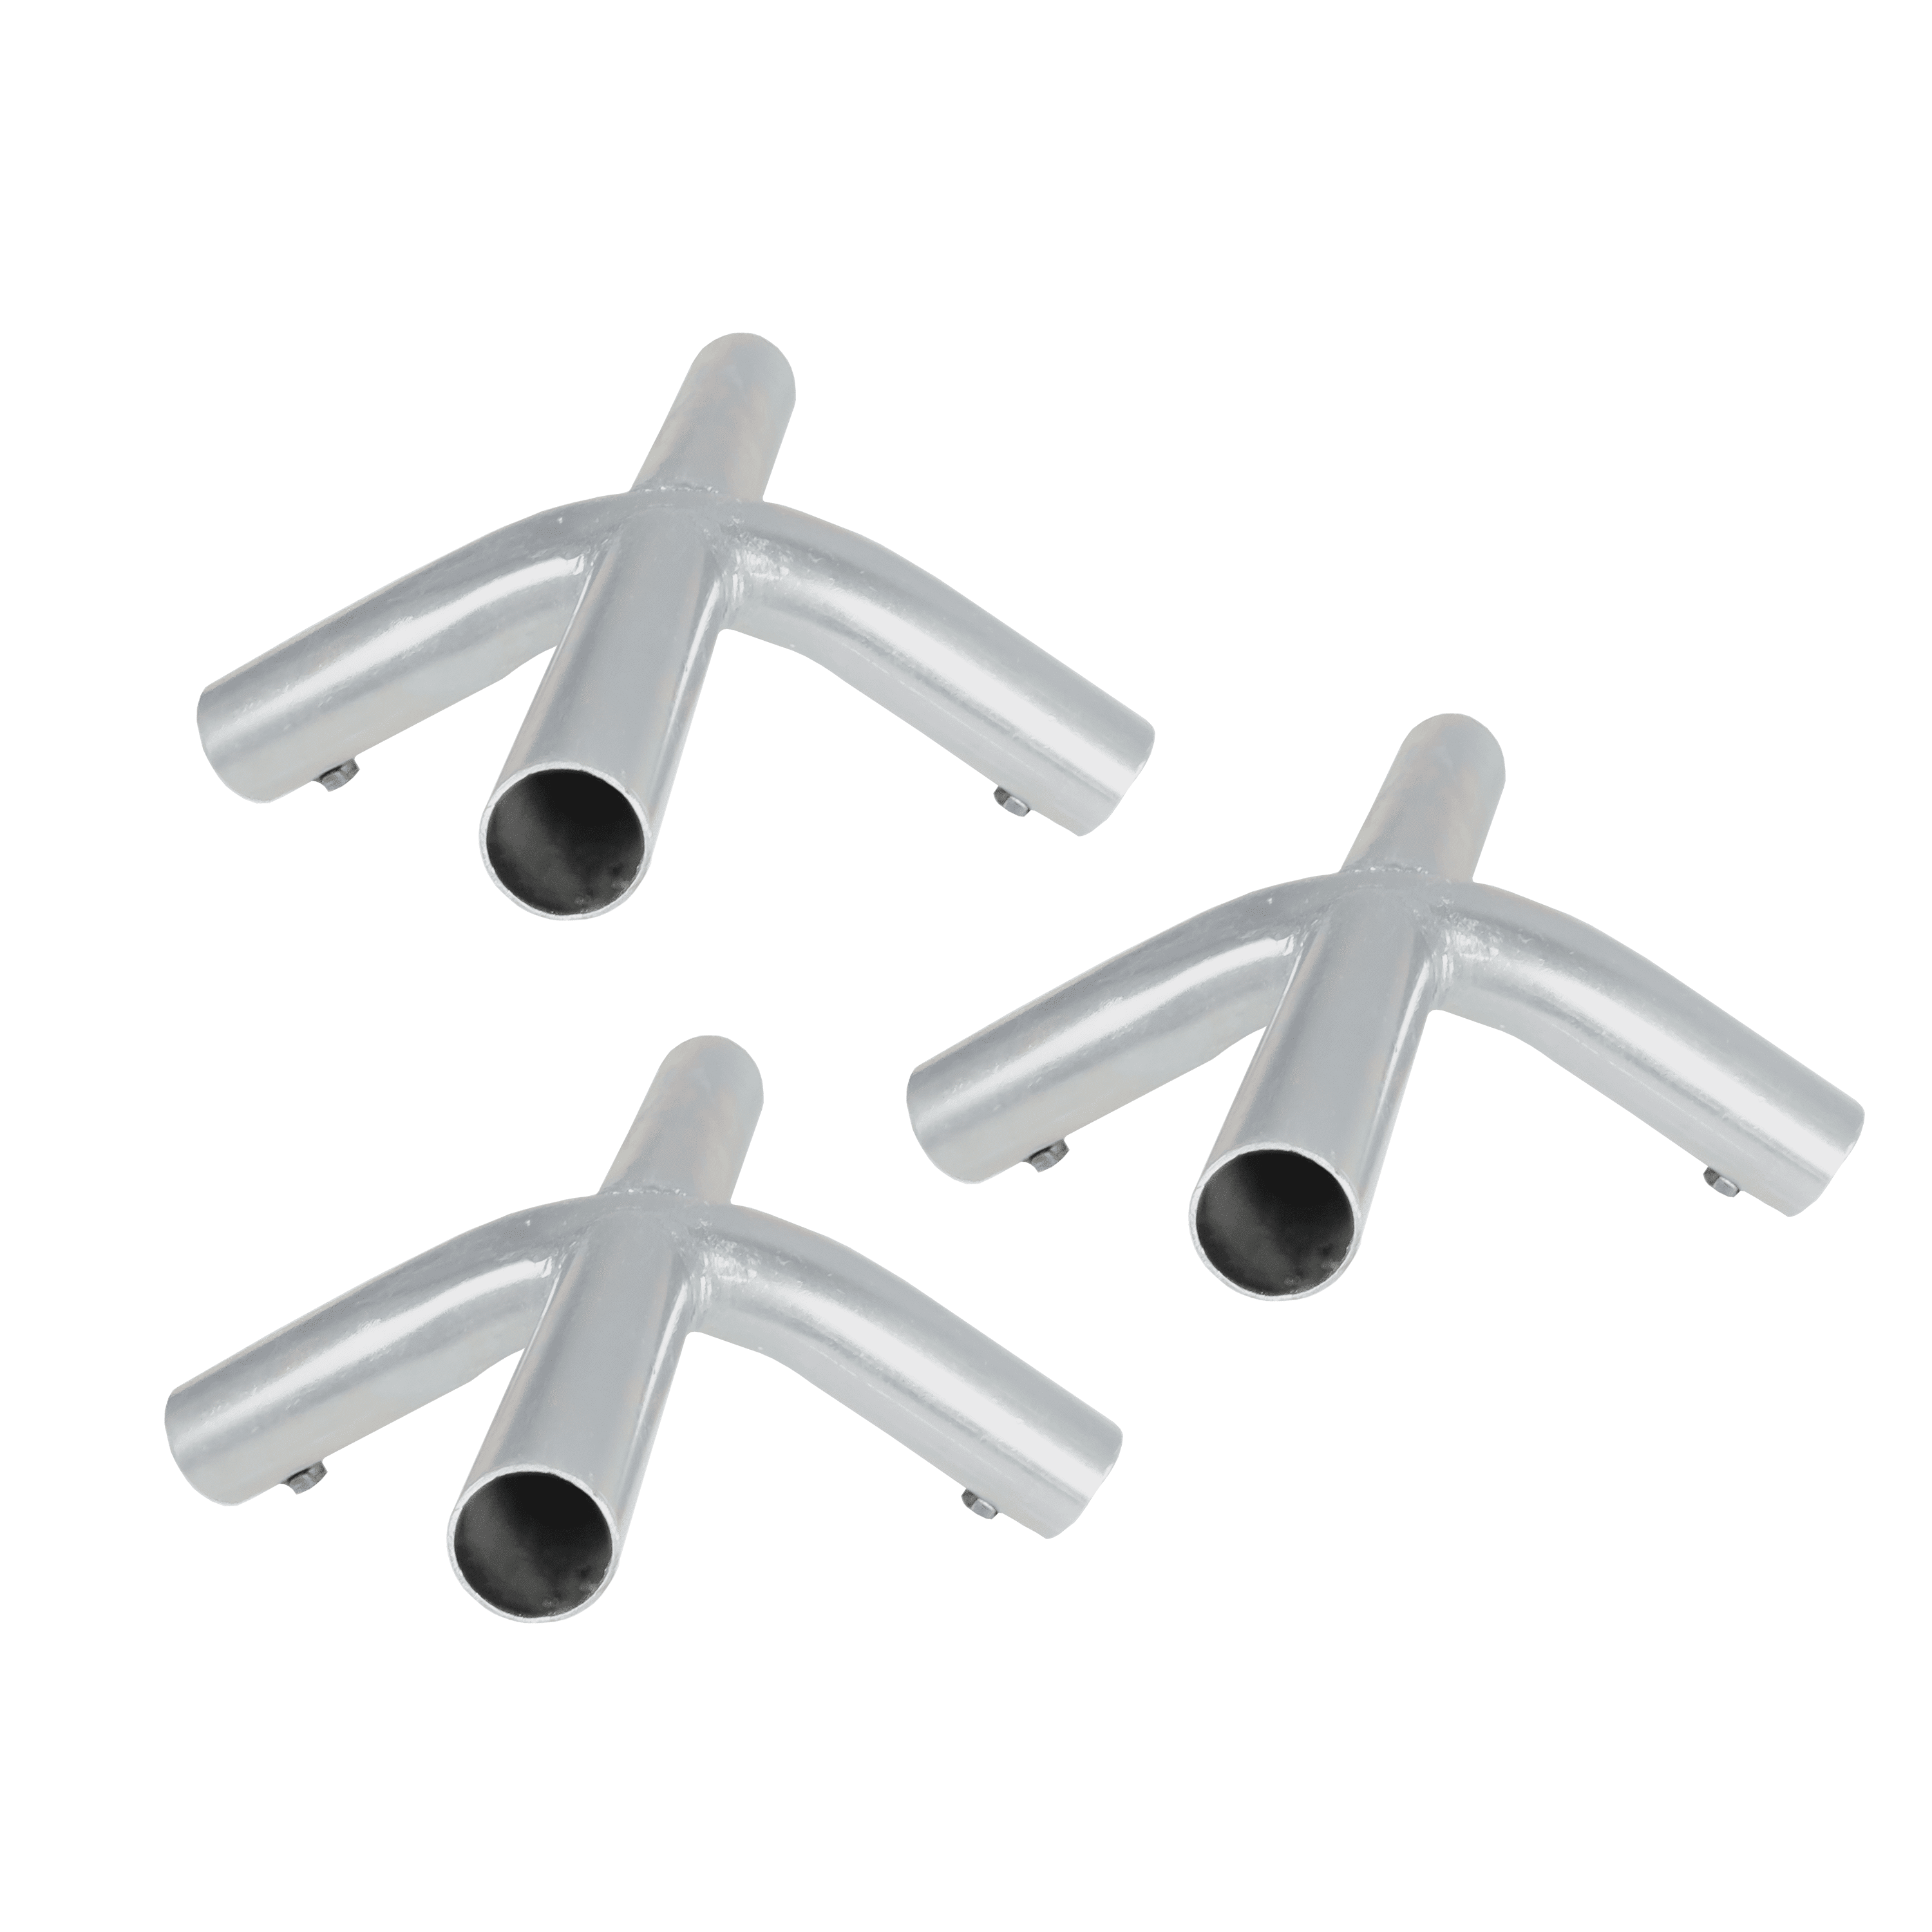 4pc 2 Way Joiner Fitting Pipe Connector Canopy Patio Carport 1 3/8" pipe FVFC 